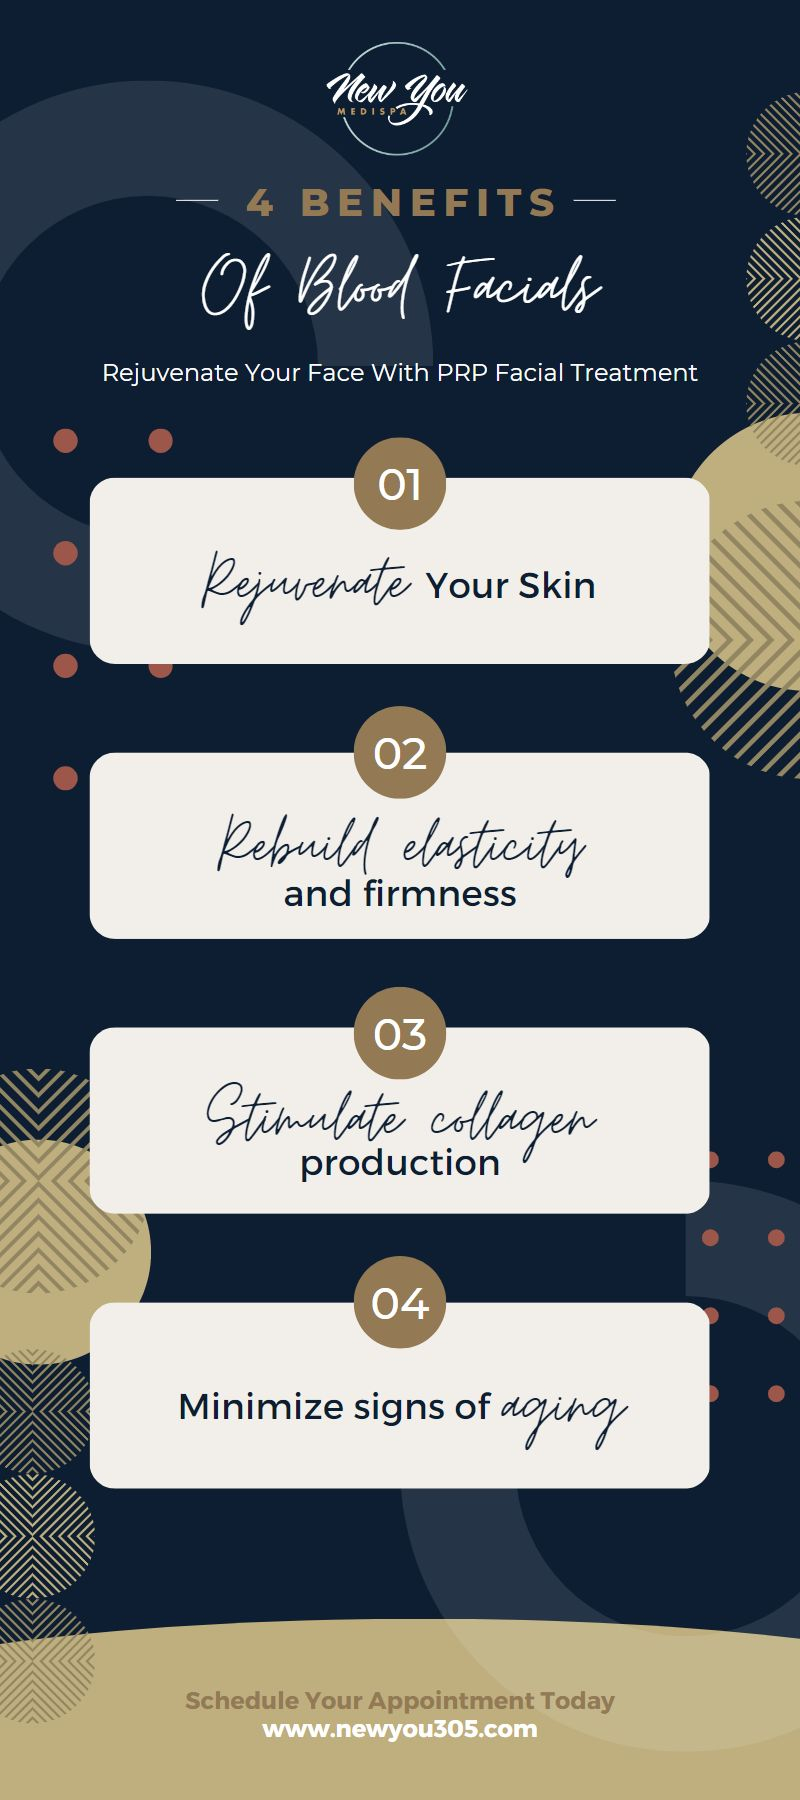 M31617 - New You - Infographic - 4 Benefits of Blood Facials.jpg